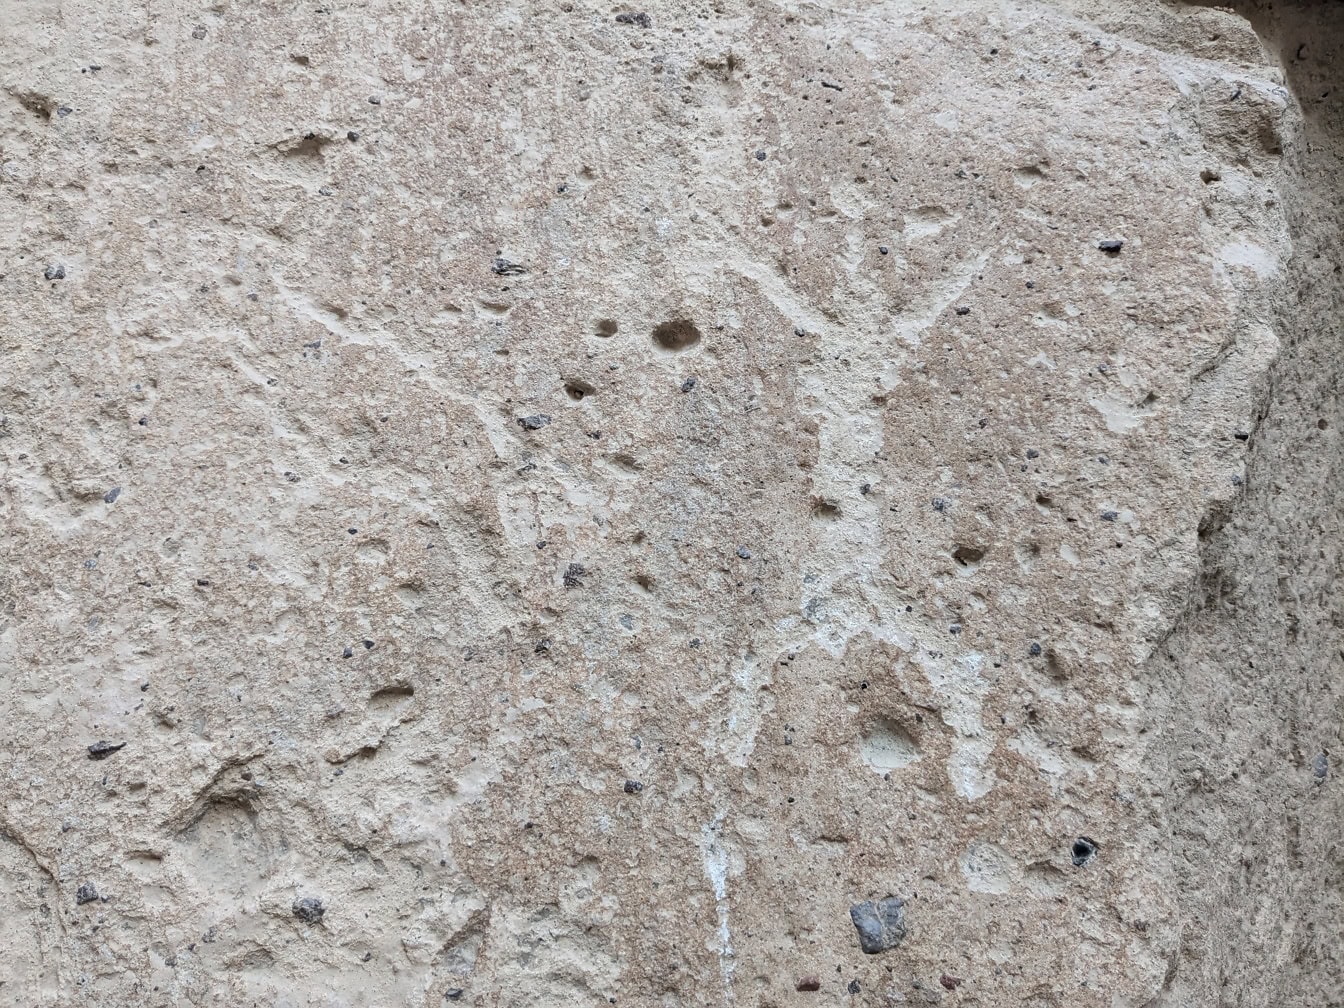 A petroglyph carved in stone depicting a Stone Age person with outstretched arms and legs